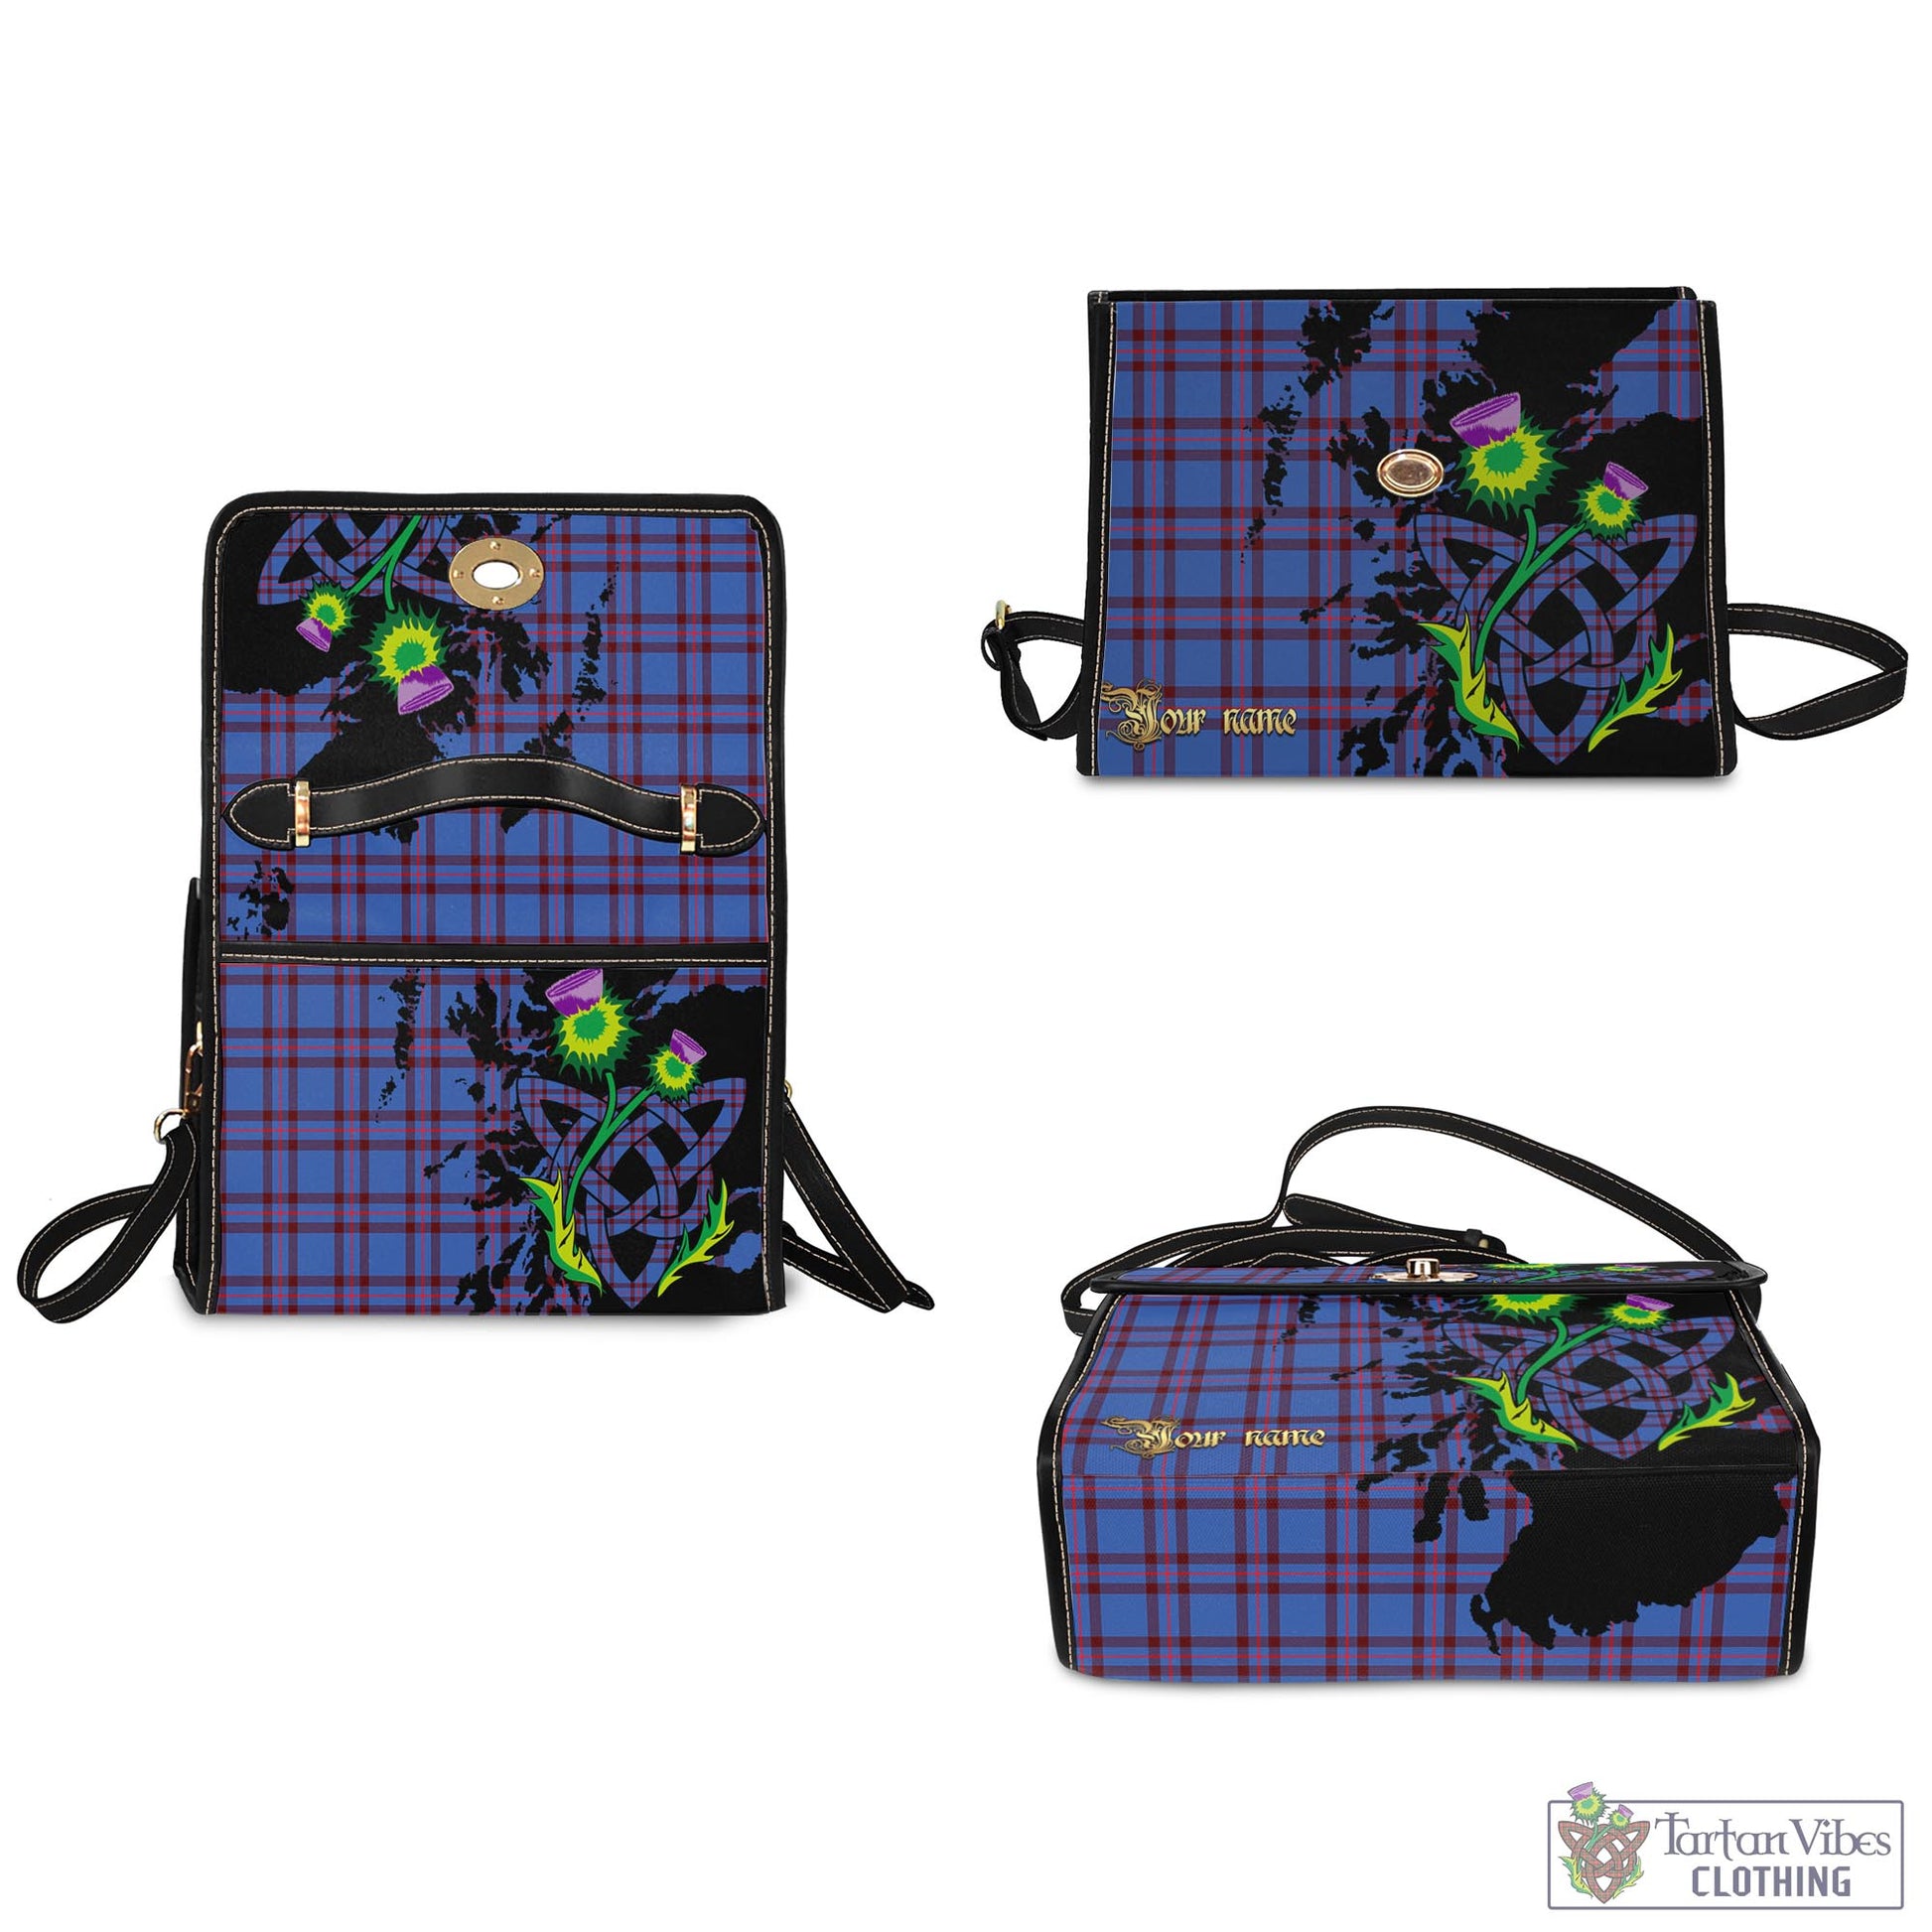 Tartan Vibes Clothing Elliot Modern Tartan Waterproof Canvas Bag with Scotland Map and Thistle Celtic Accents